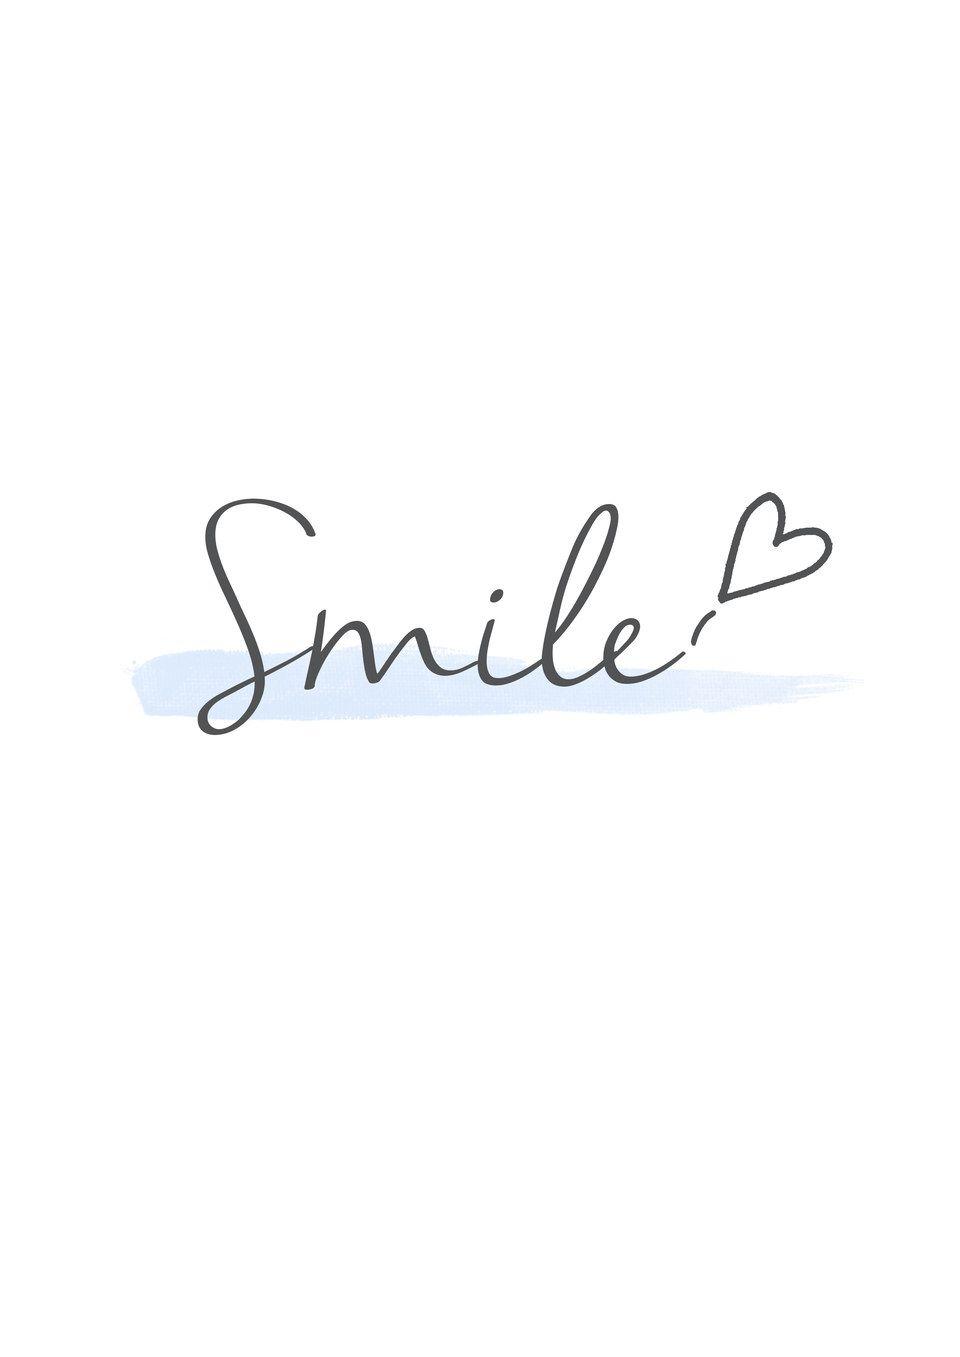 White Smile Wallpapers Top Free White Smile Backgrounds Wallpaperaccess